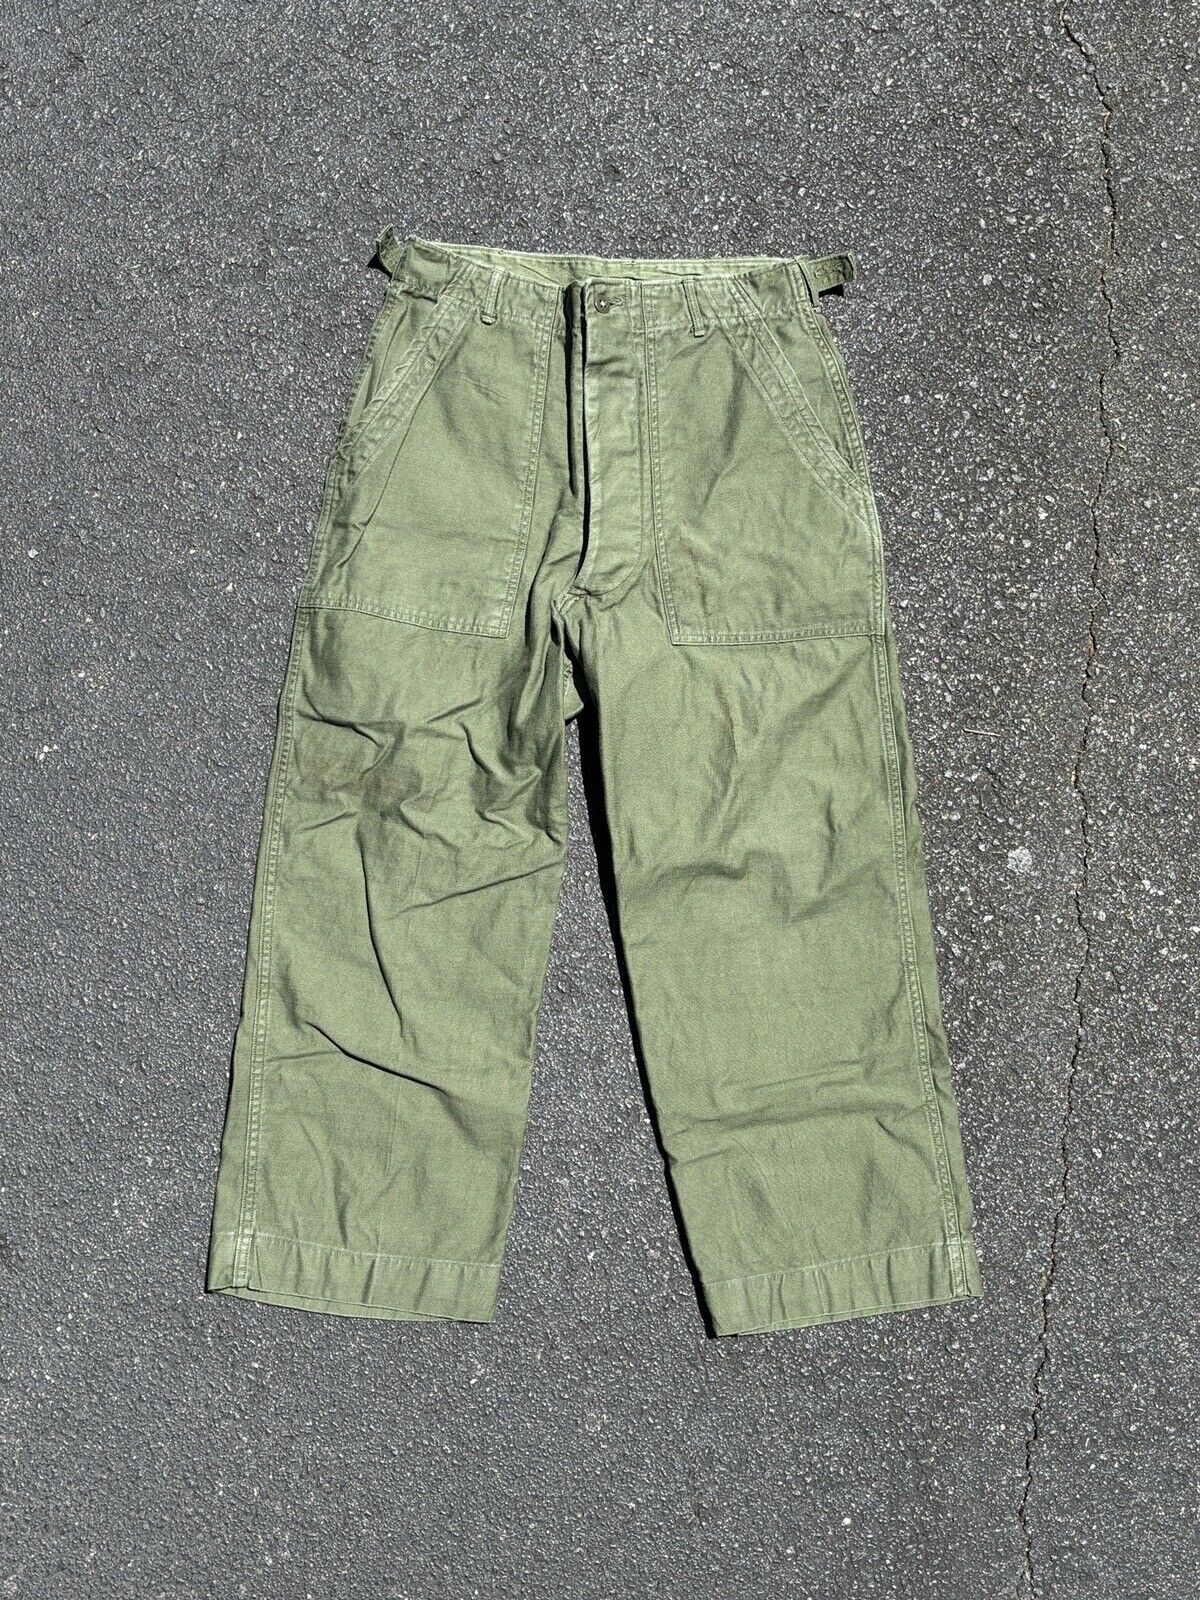 1960s vintage VIETNAM sateen OG-107 us army 30x30 military TYPE1 trousers pants